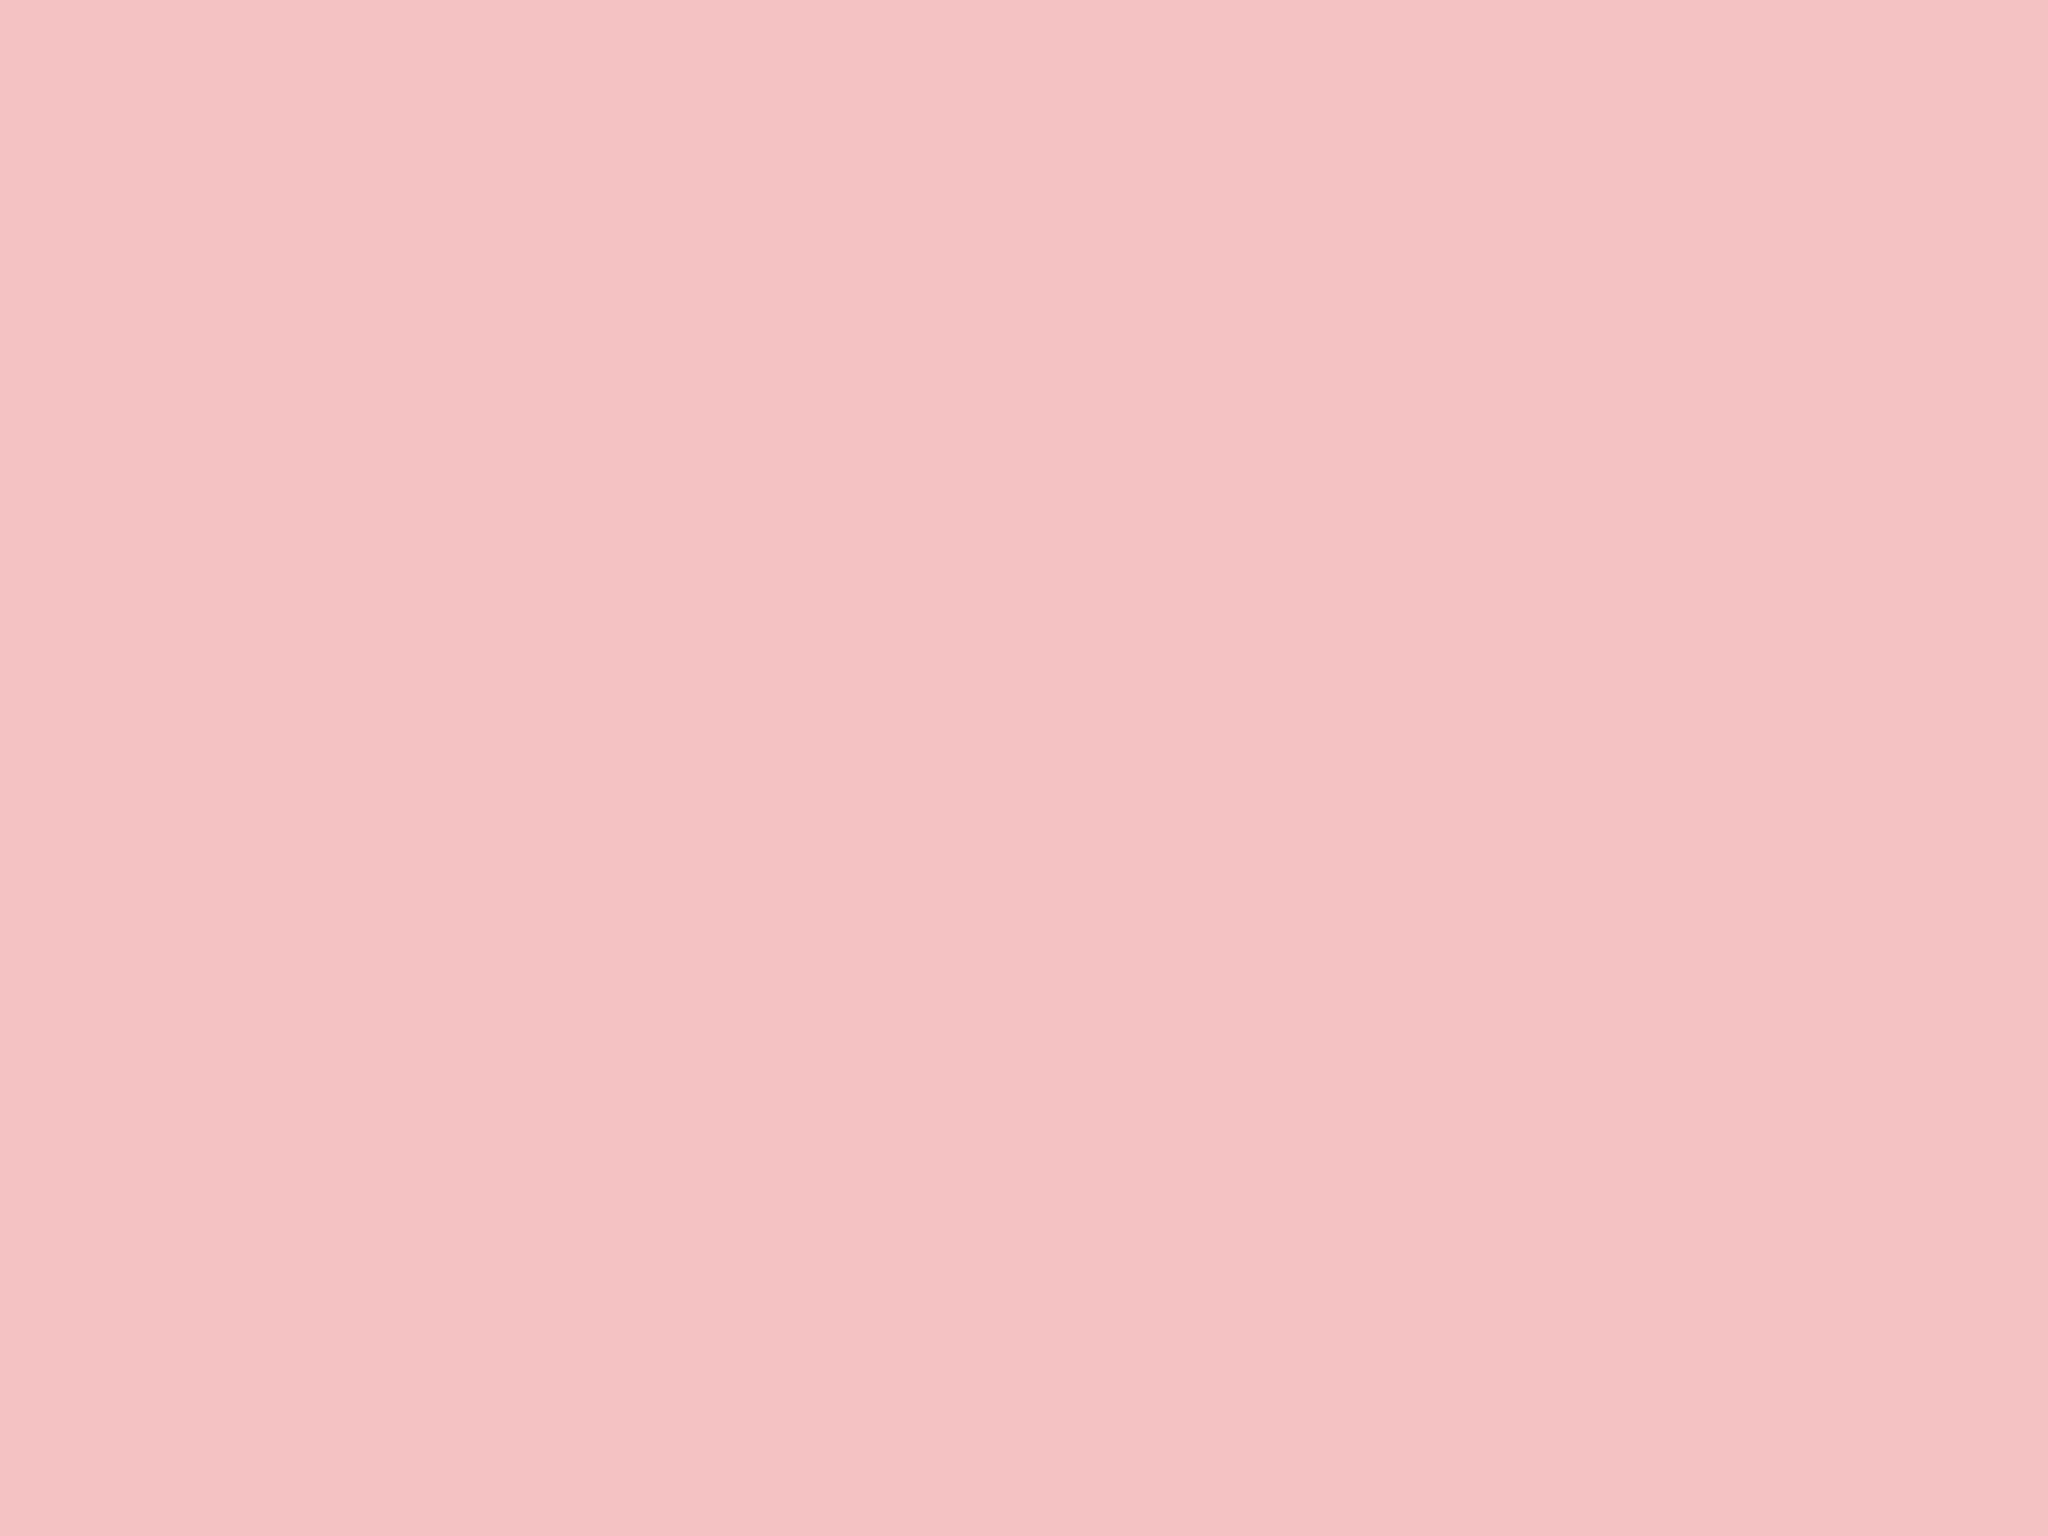  2048x1536 resolution Baby Pink solid color background view and 2048x1536